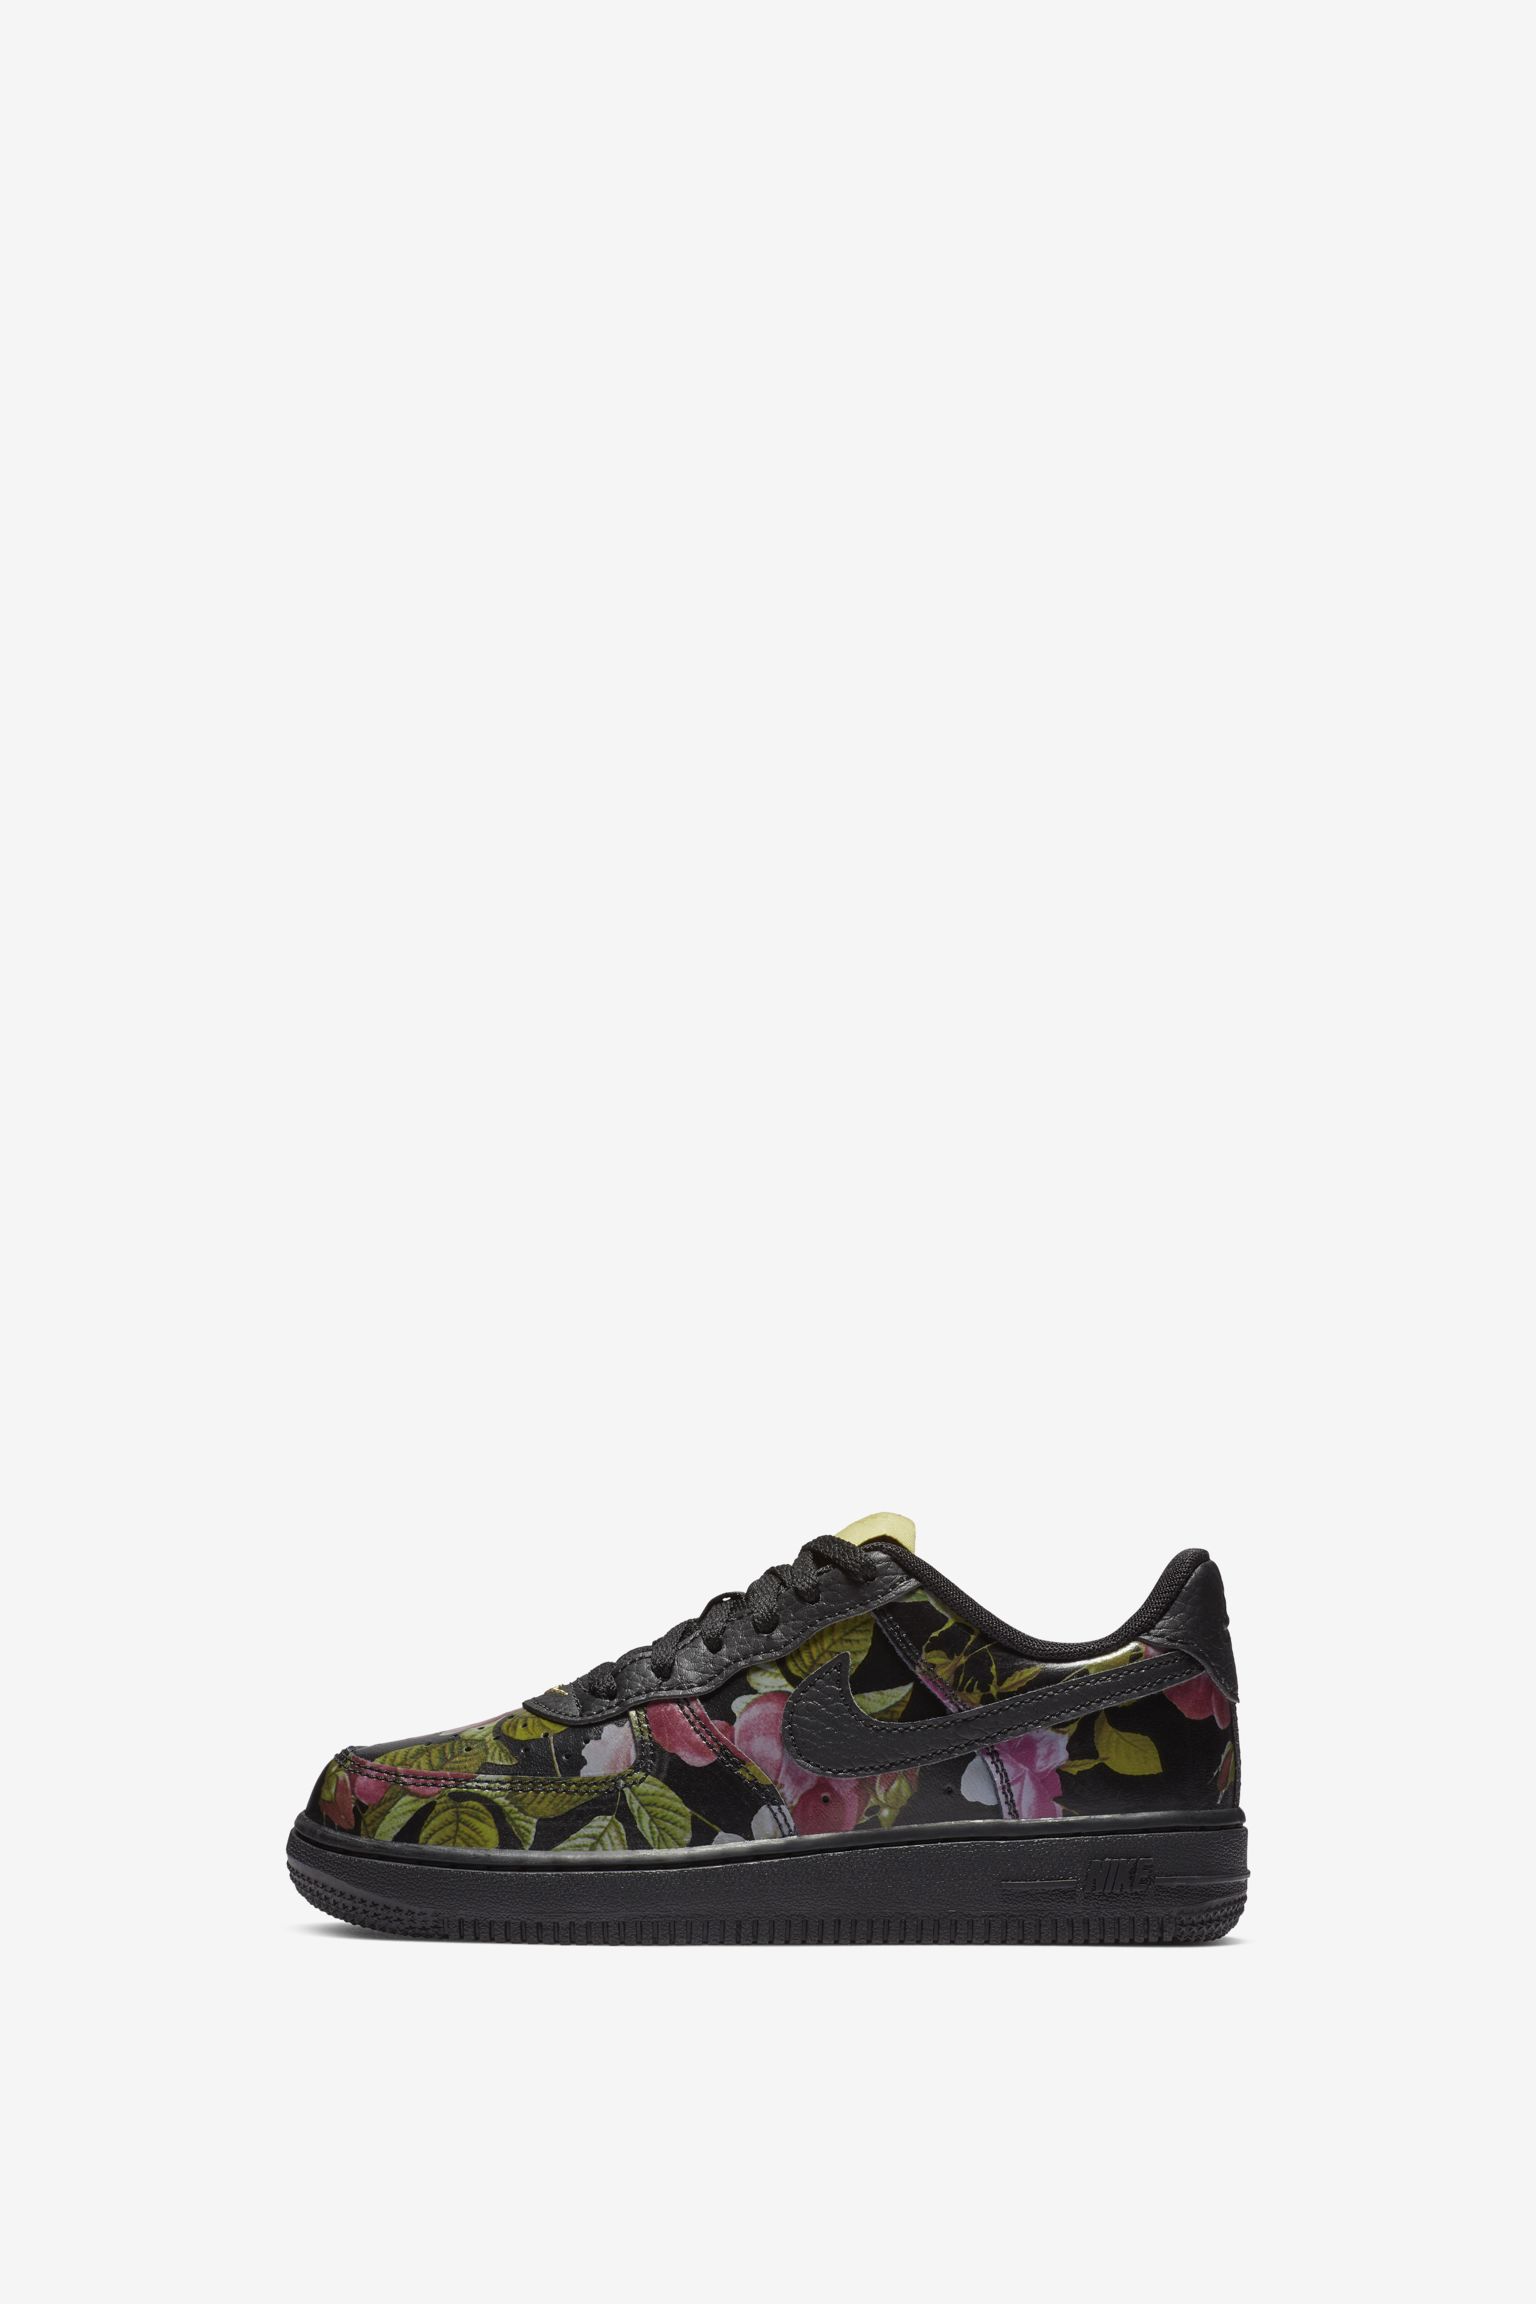 womens nike floral